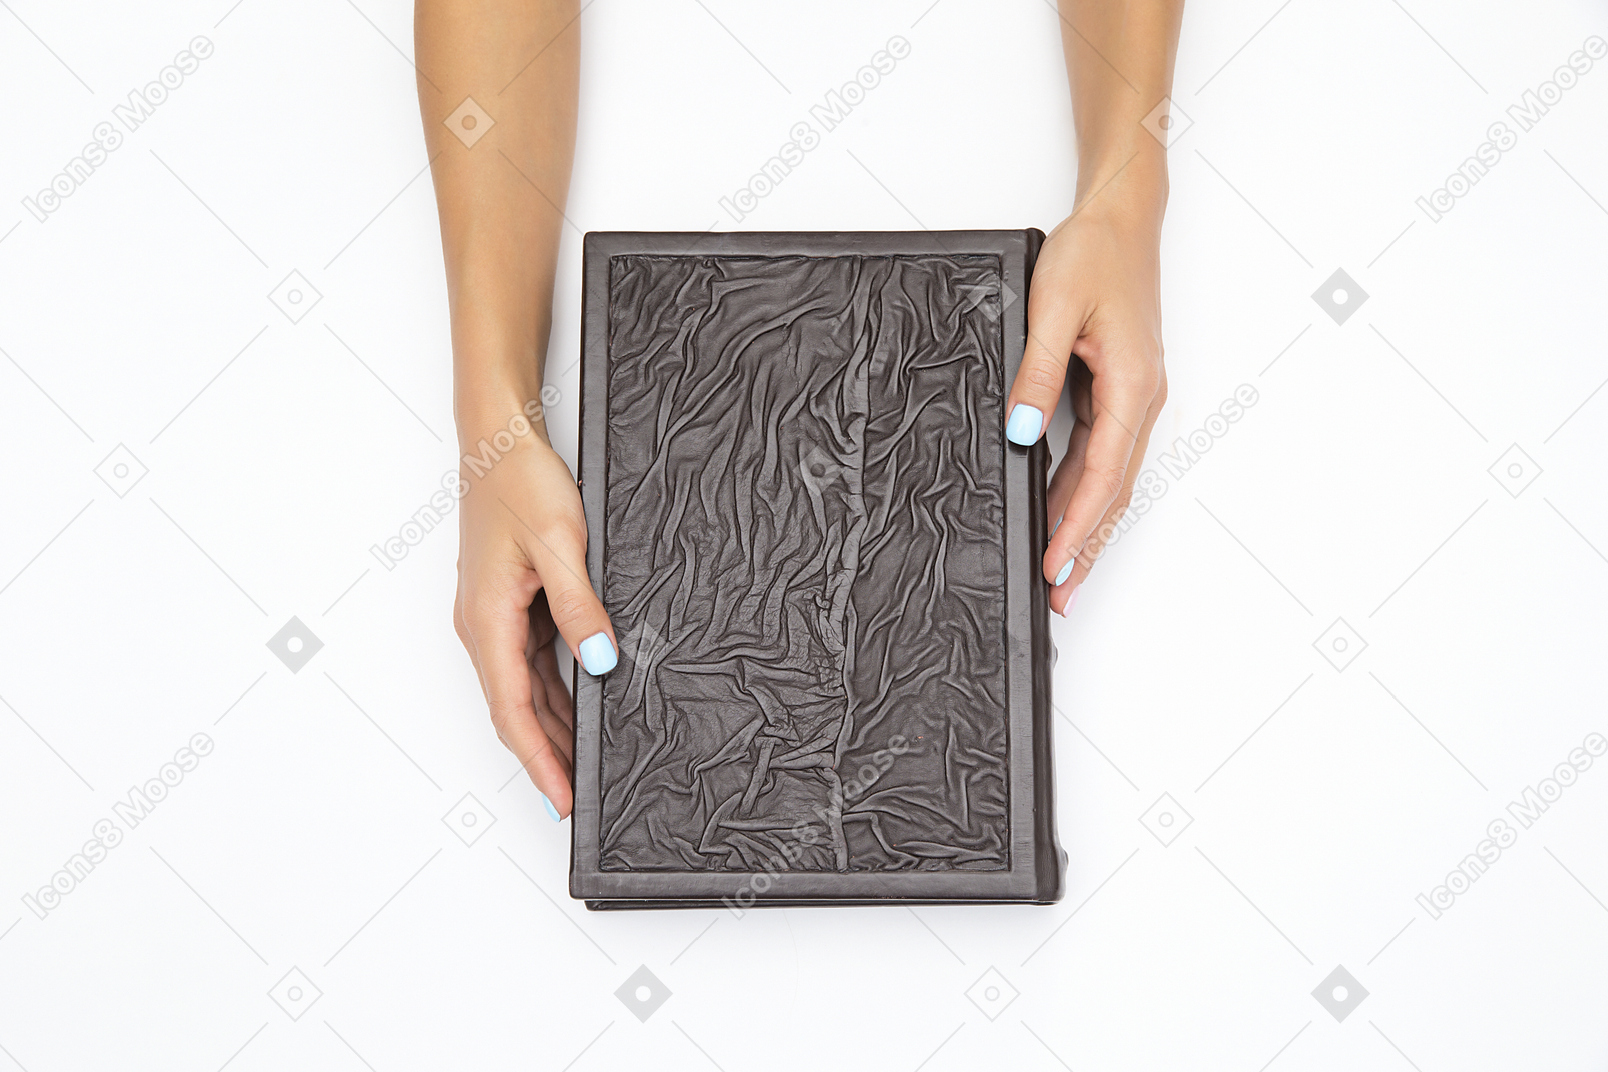 Female hands holding a black book